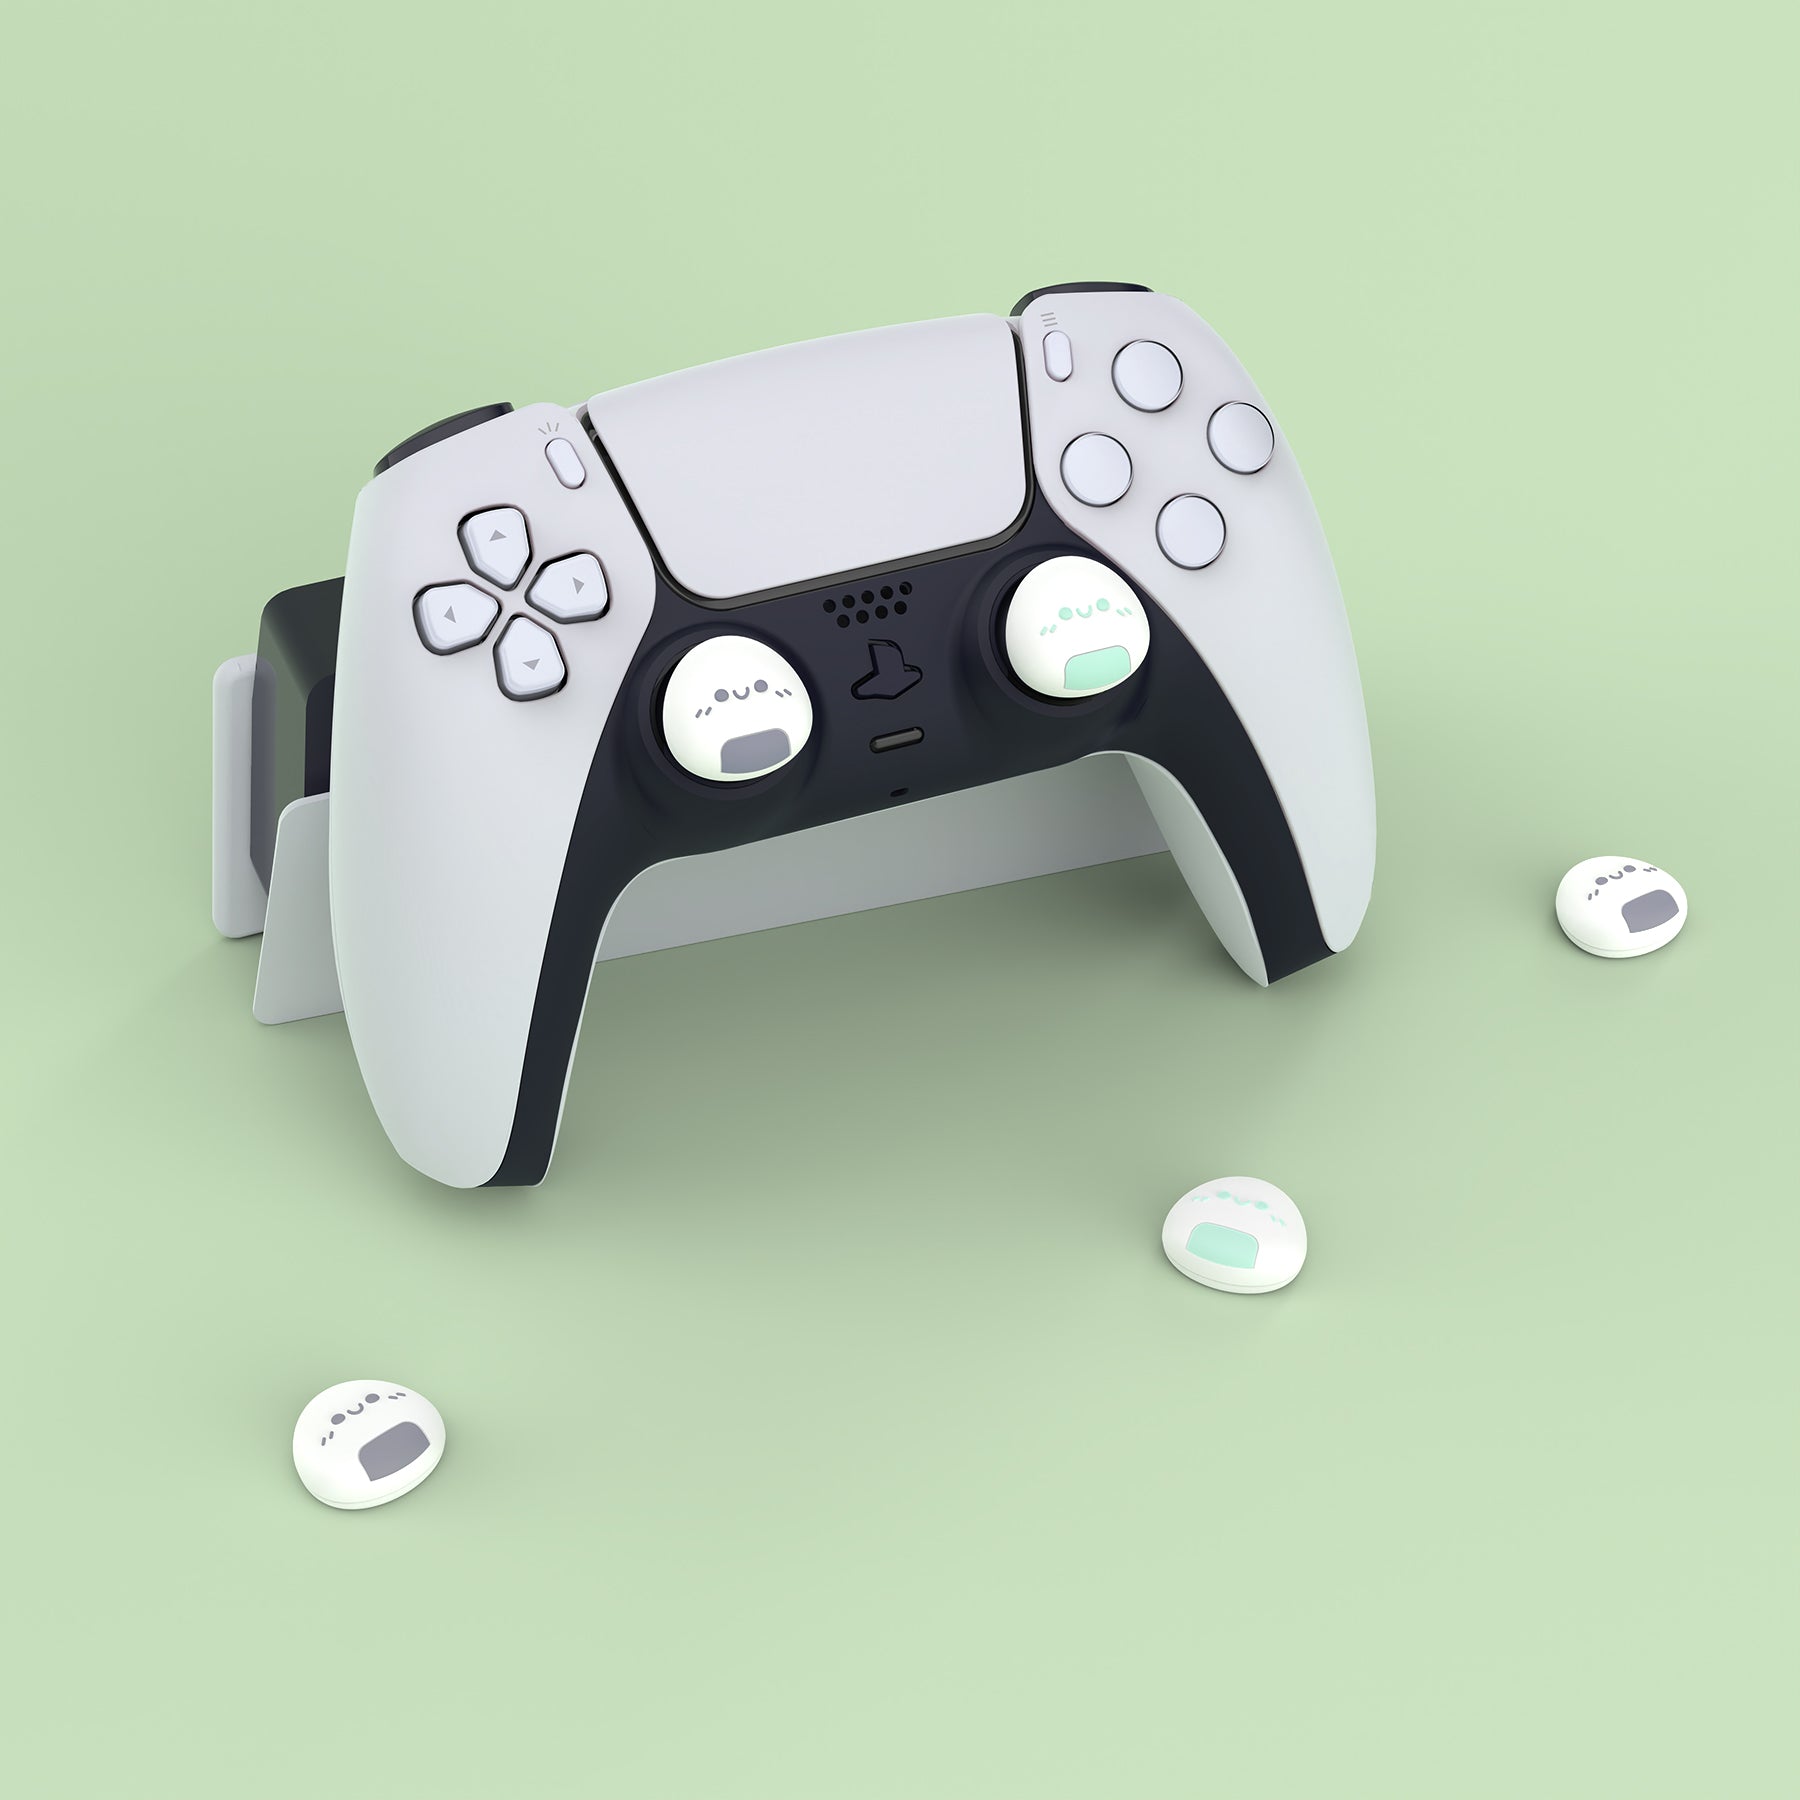 PlayVital Onigiri Cute Thumb Grip Caps for PS5/4 Controller, Silicone Analog Stick Caps Cover for Xbox Series X/S, Thumbstick Caps for Switch Pro Controller - Gray & Seafoam Green - PJM3007 PlayVital